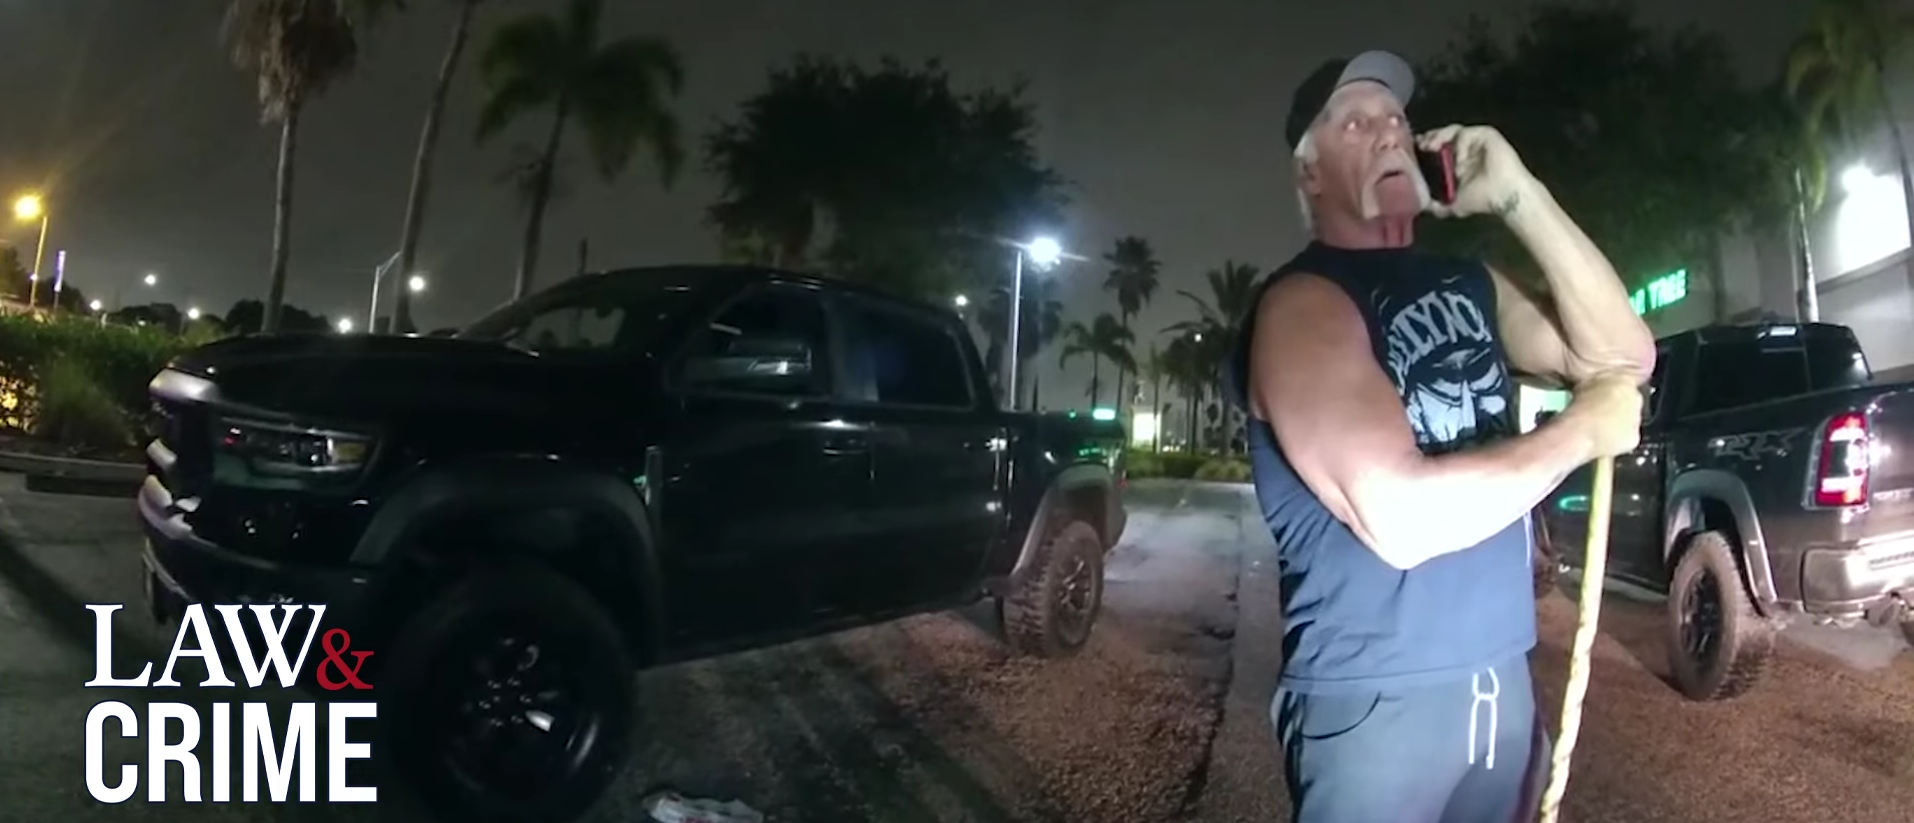 Bodycam Footage Shows Hulk Hogan Arriving To Chaotic Scene Of His Son’s Arrest For Alleged DUI